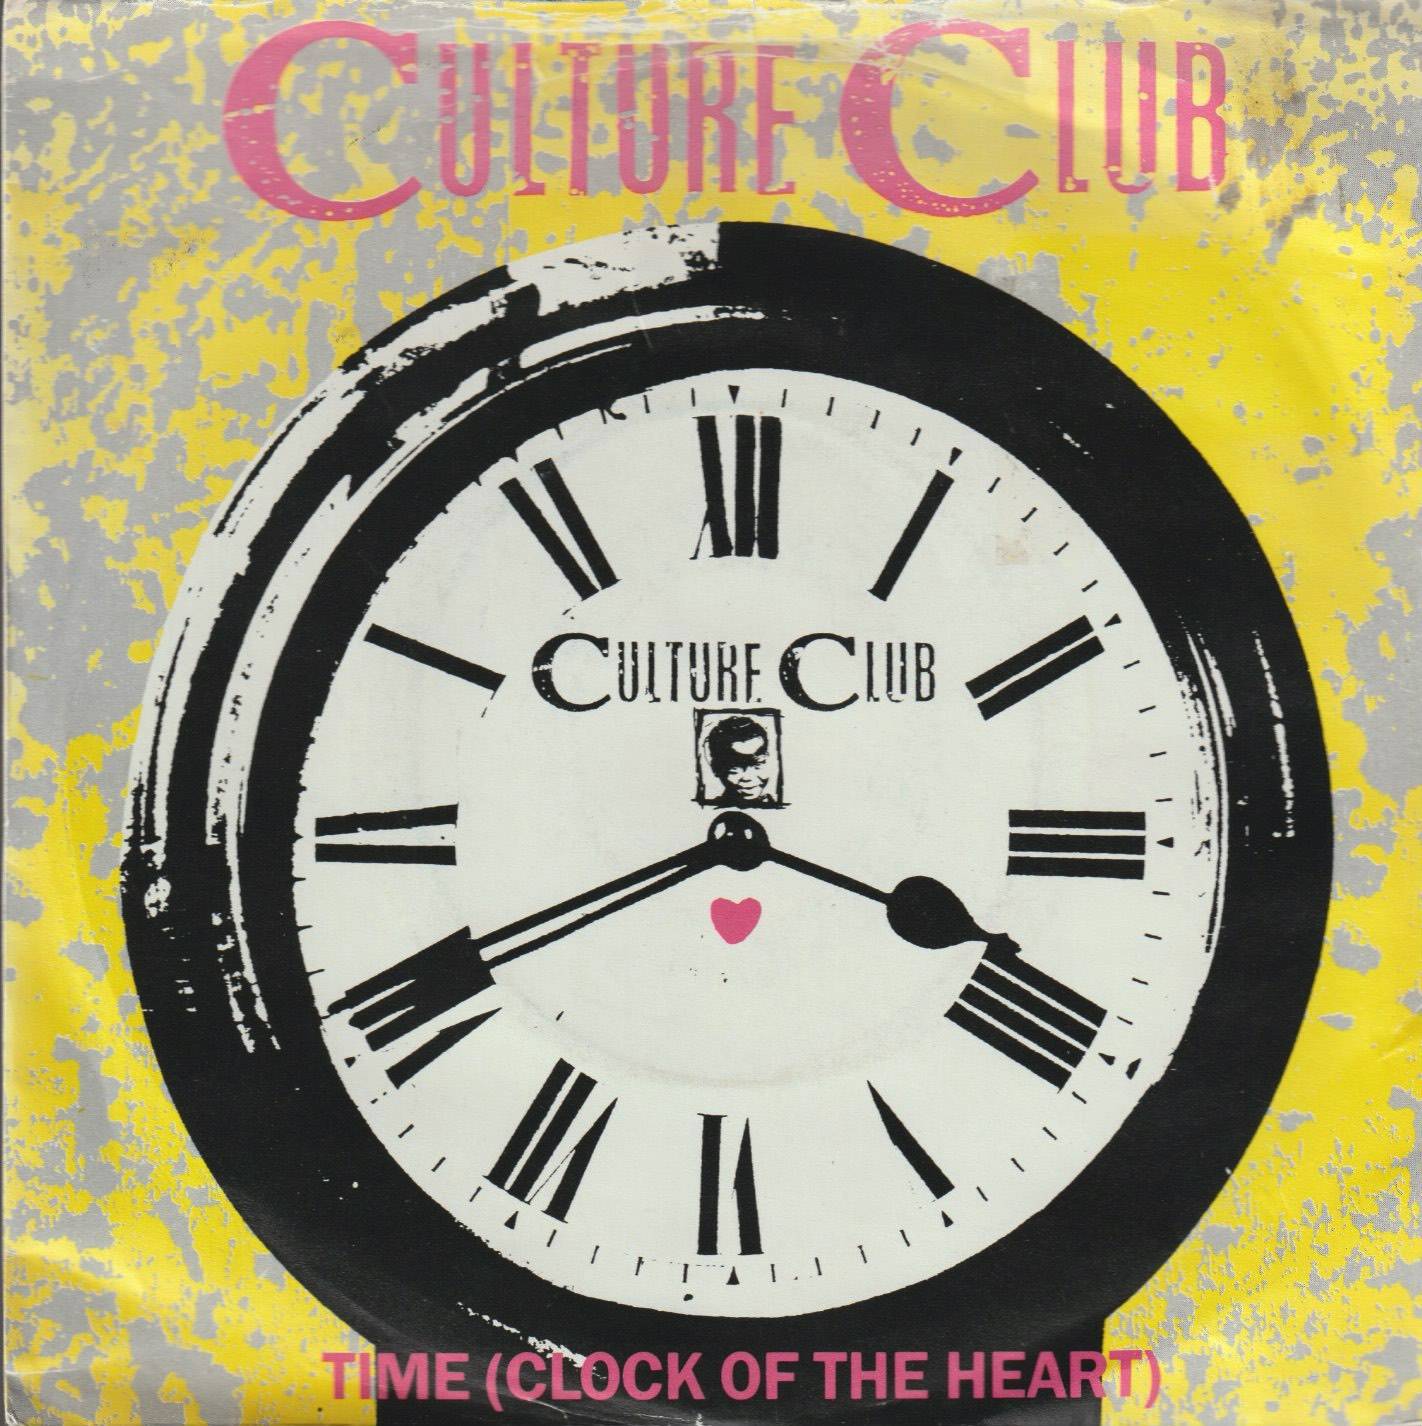 CULTURE CLUB - TIME ( CLOCK OF THE HEART ) / WHITE BOYS CAN'T CONTROL IT -  aquarius age sagl